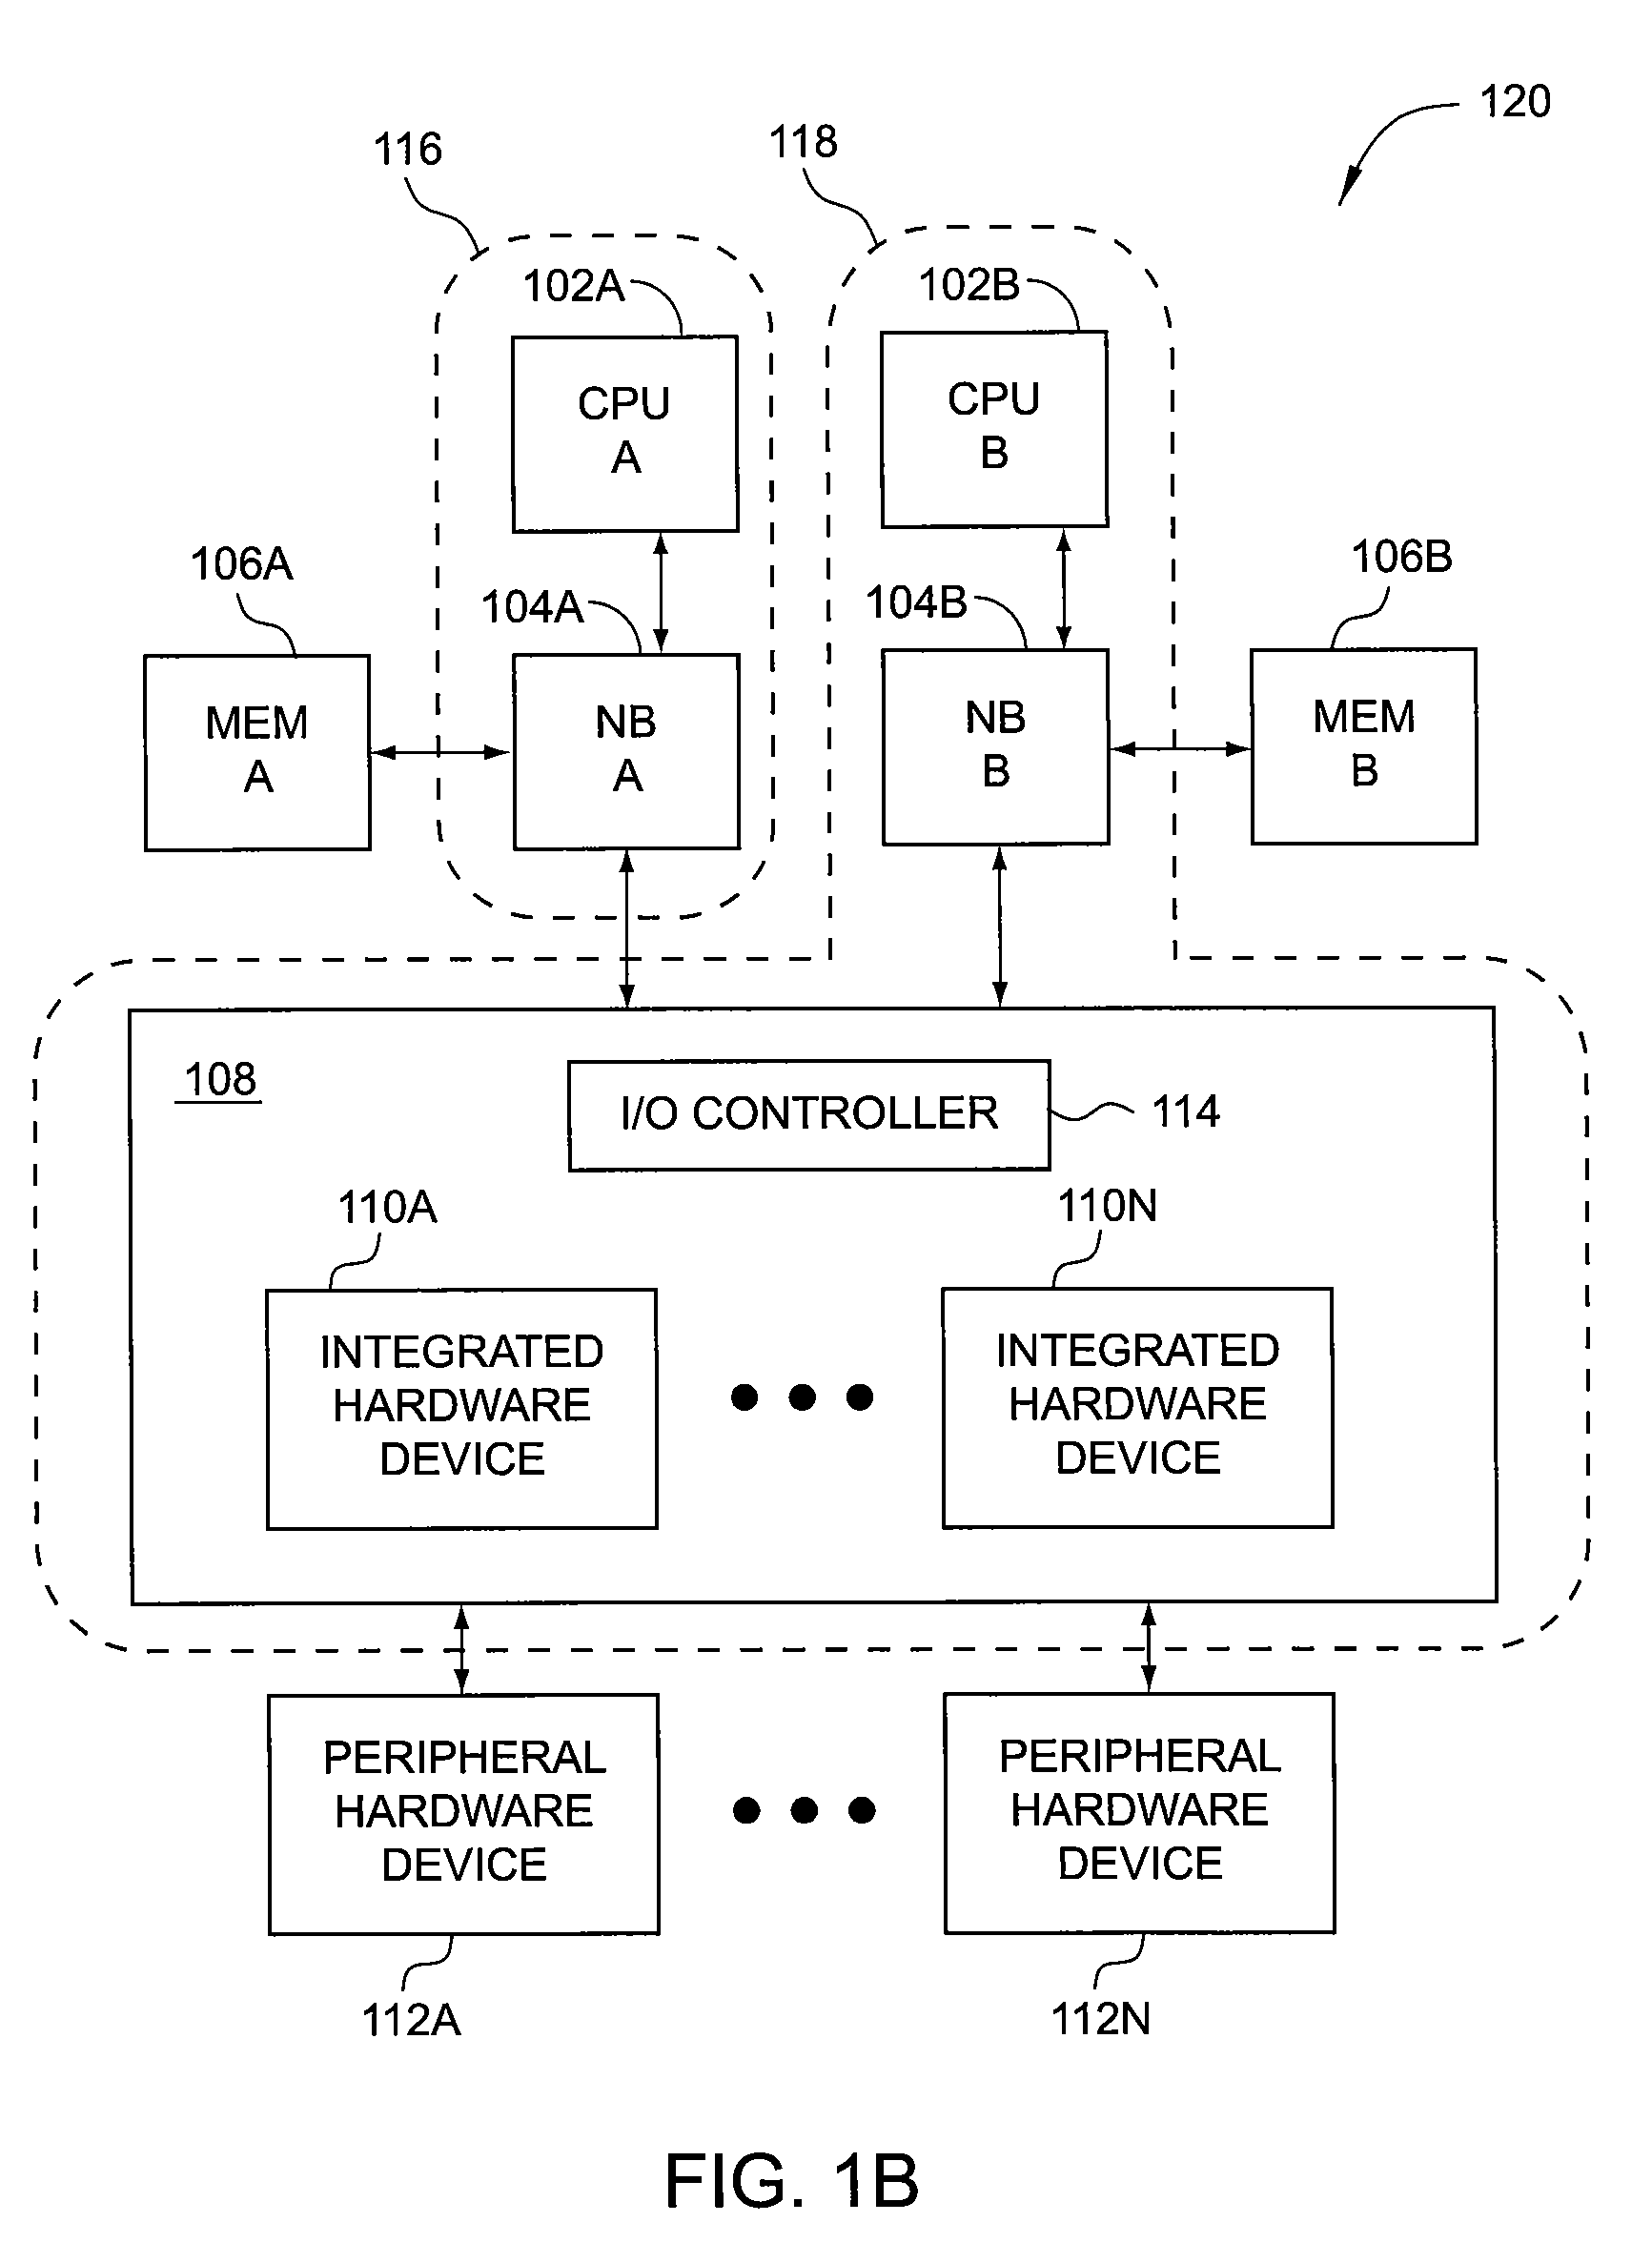 Chipset Support For Non-Uniform Memory Access Among Heterogeneous Processing Units